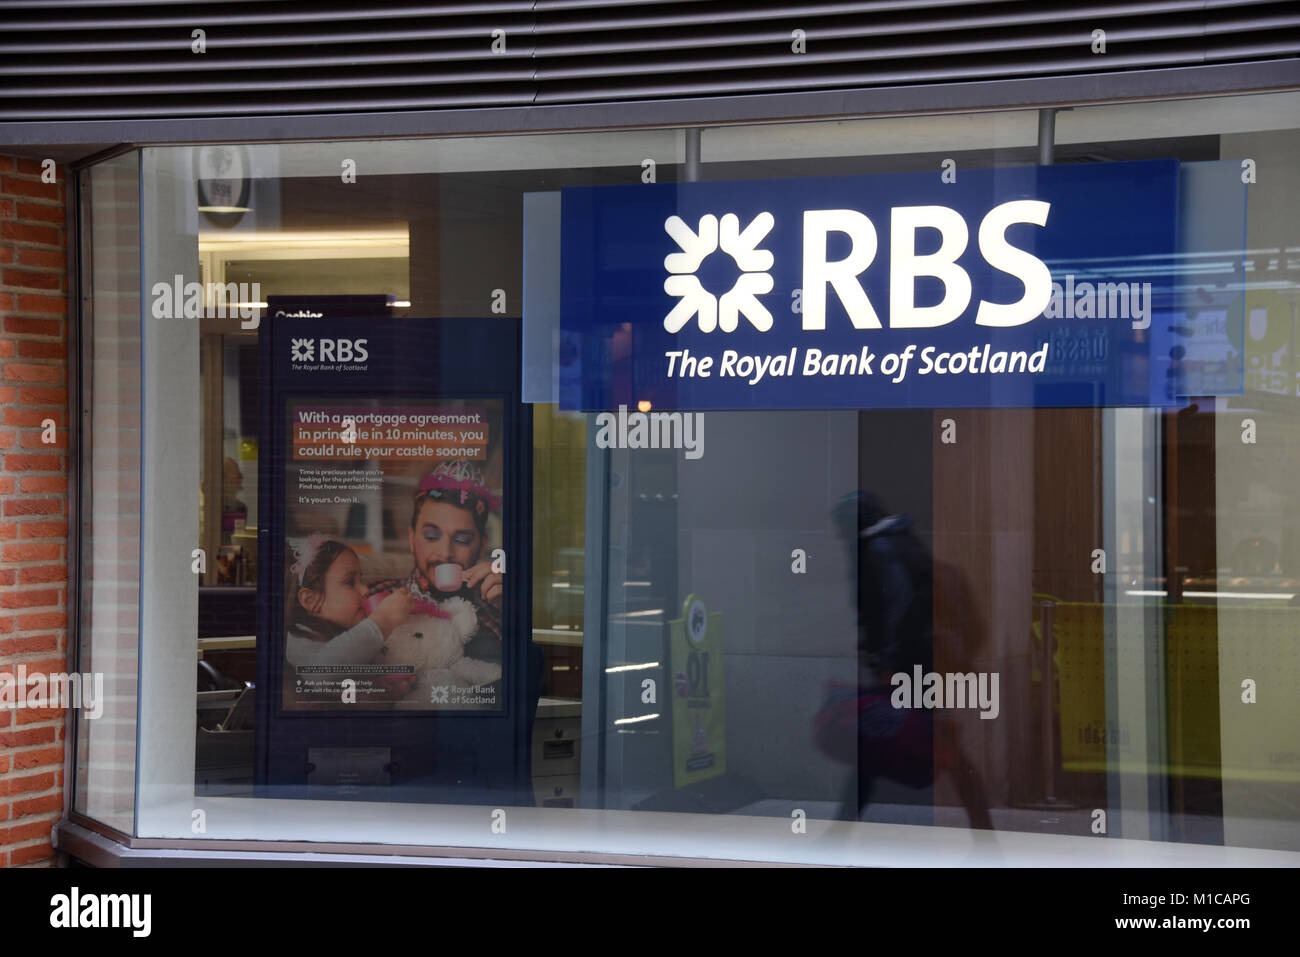 London, UK. 20th Aug, 2017. Exterior of the Royal Bank of Scotland (RBS) in London, England, 20 August 2017. - NO WIRE SERVICE - Credit: Waltraud Grubitzsch/dpa-Zentralbild/dpa/Alamy Live News Stock Photo